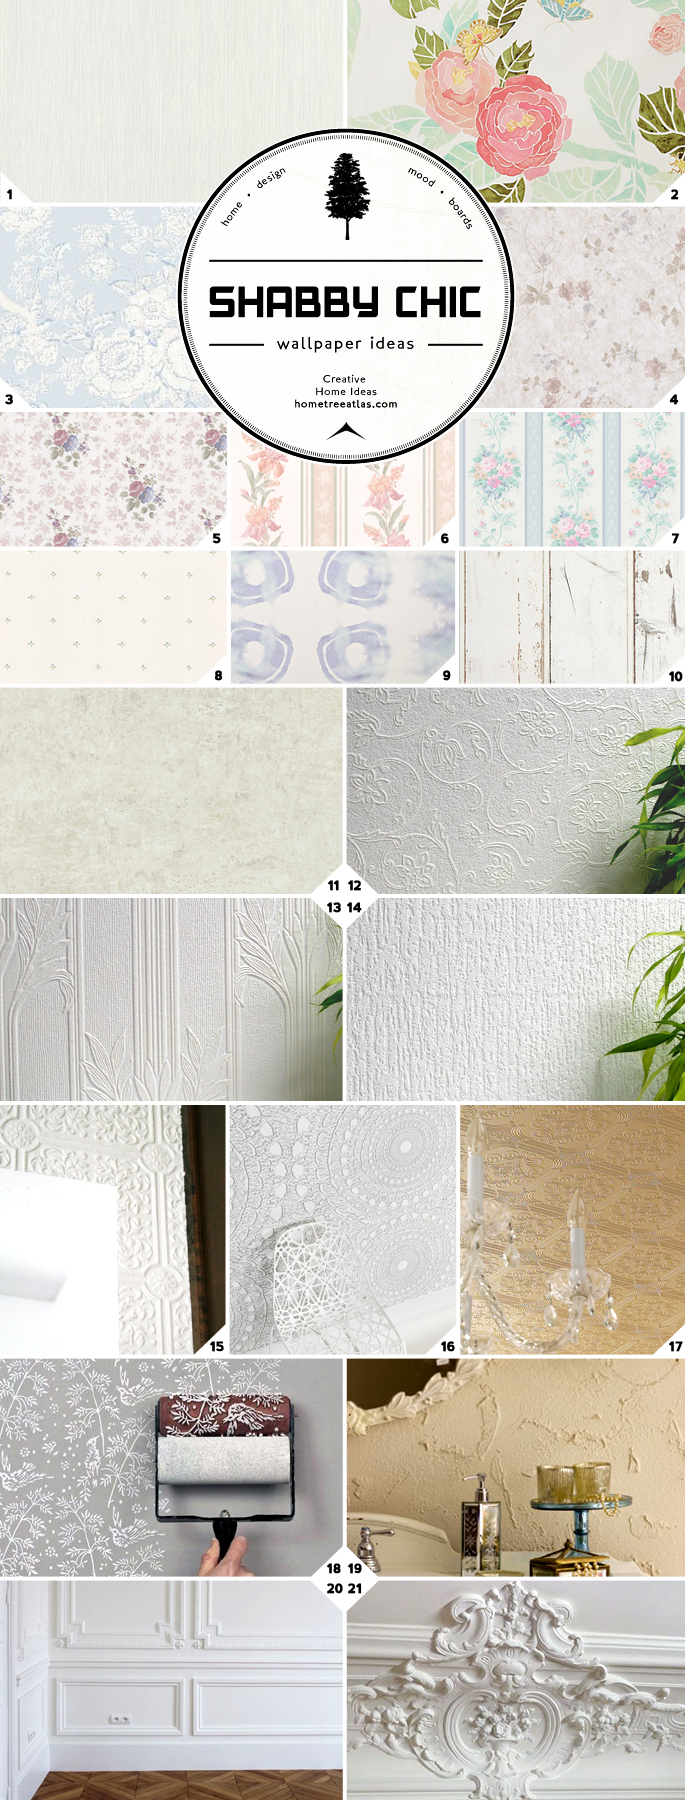 Most of the shabby chic wallpaper designs and ideas in the mood board